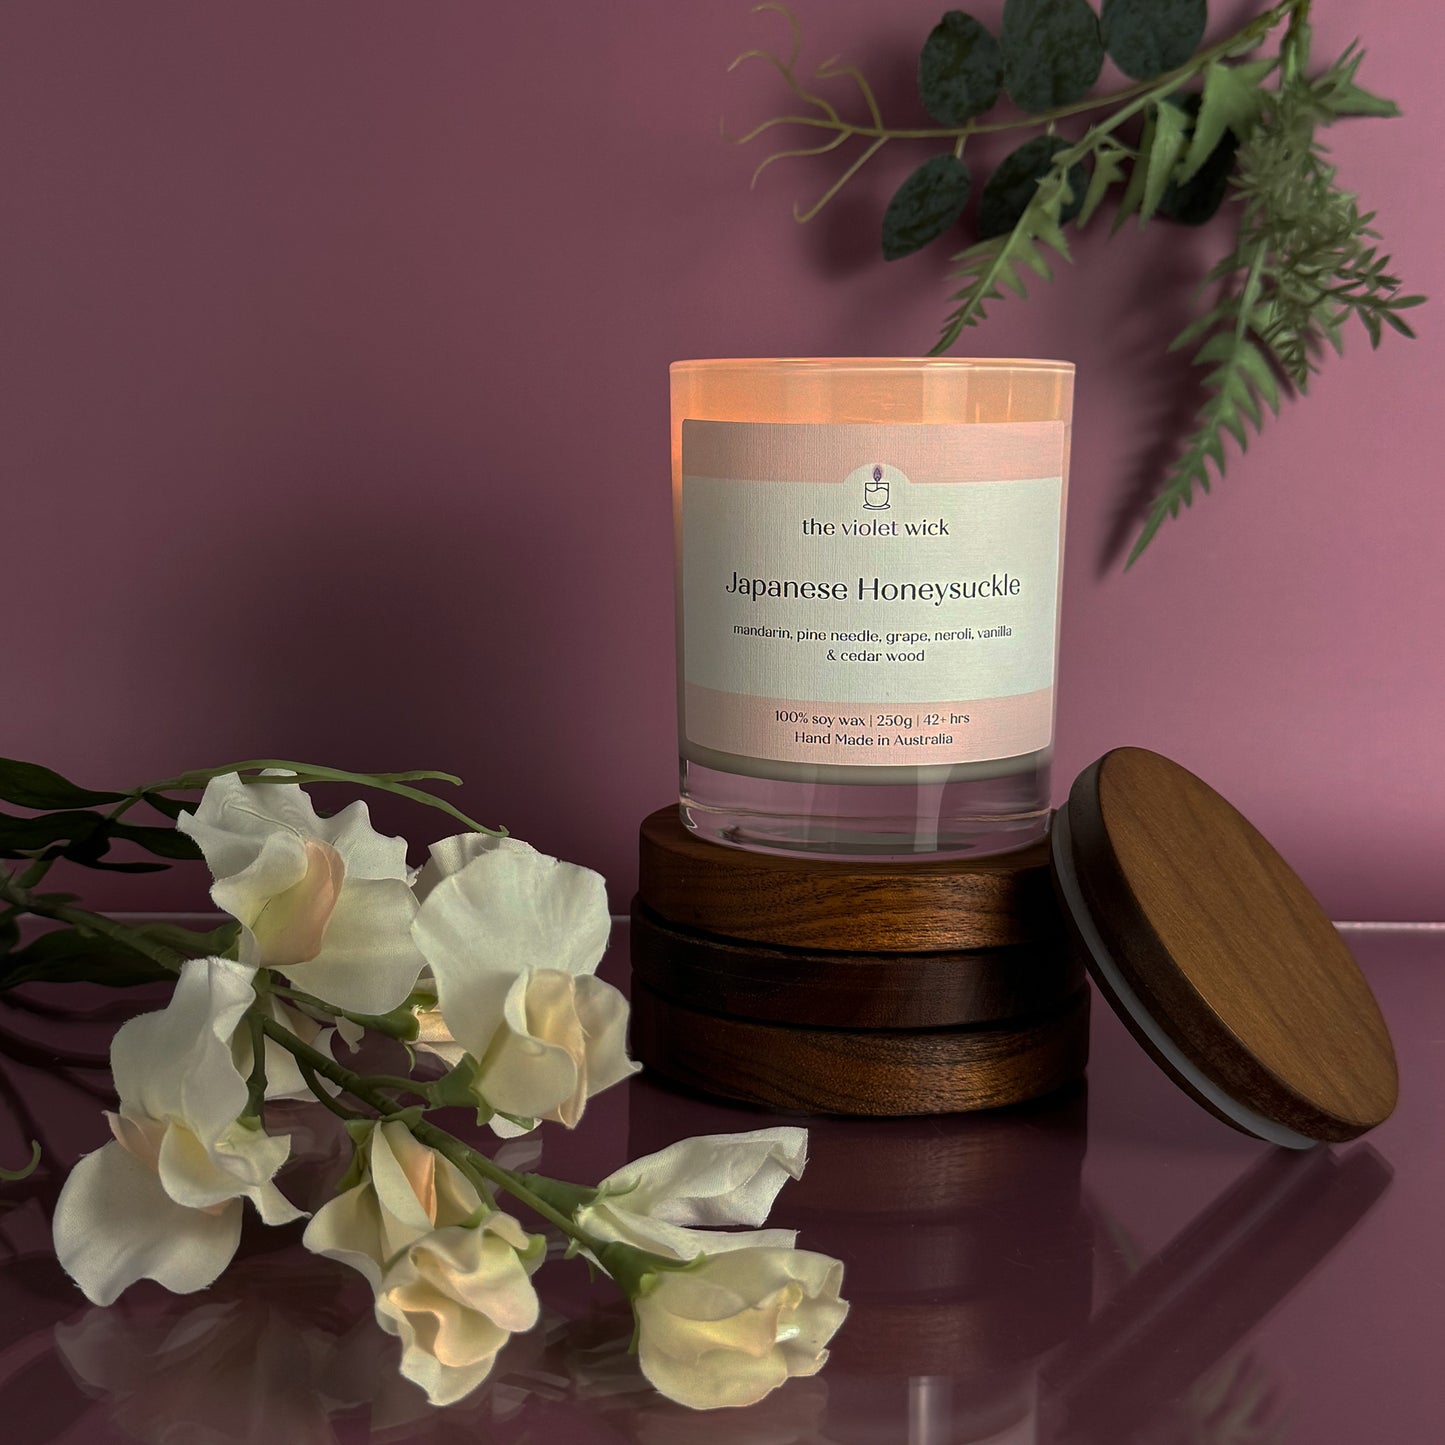 Japanese Honeysuckle Soy Candle from The Violet Wick